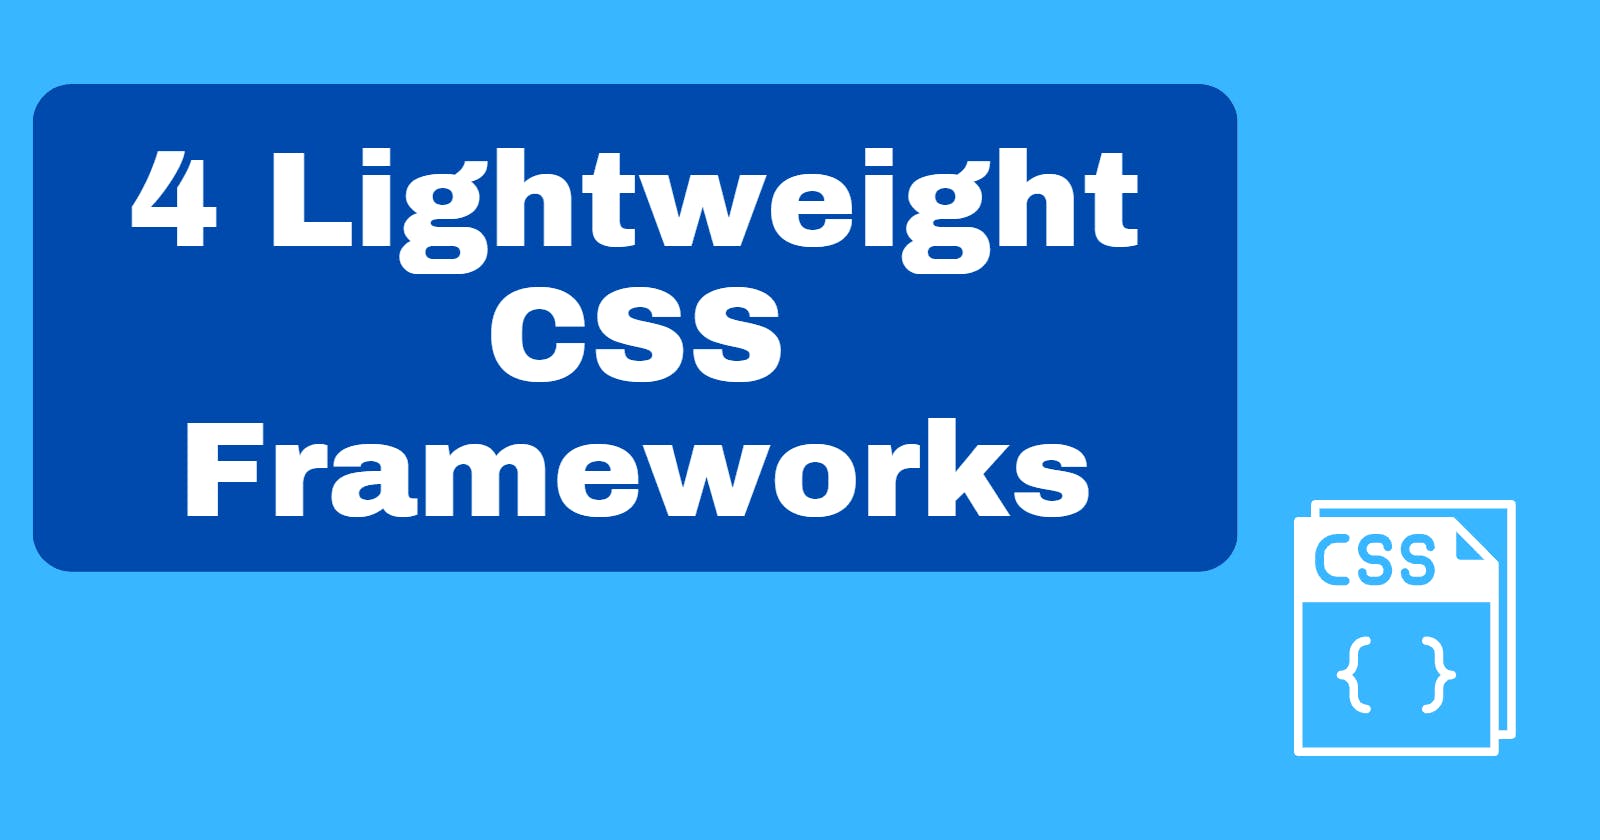 Starting a New Side Project? Here Are 4 Lightweight CSS Frameworks to Get up and Running.